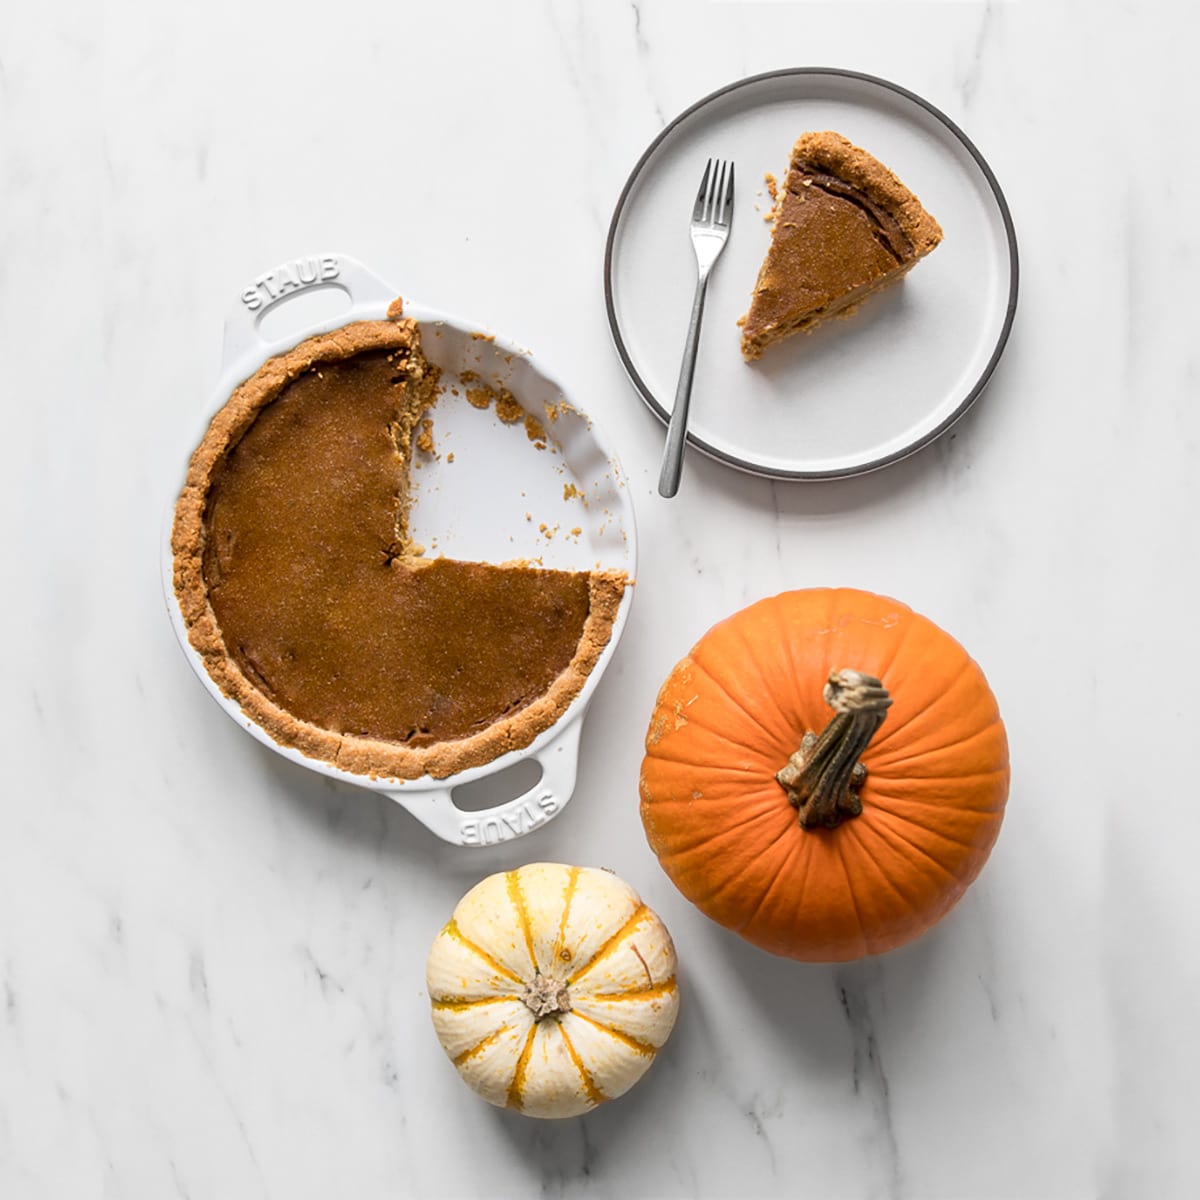 Pumpkin pie in a white pie dish, with slice removed and on a grey plate. Two small pumpkins placed beside the pie dish.